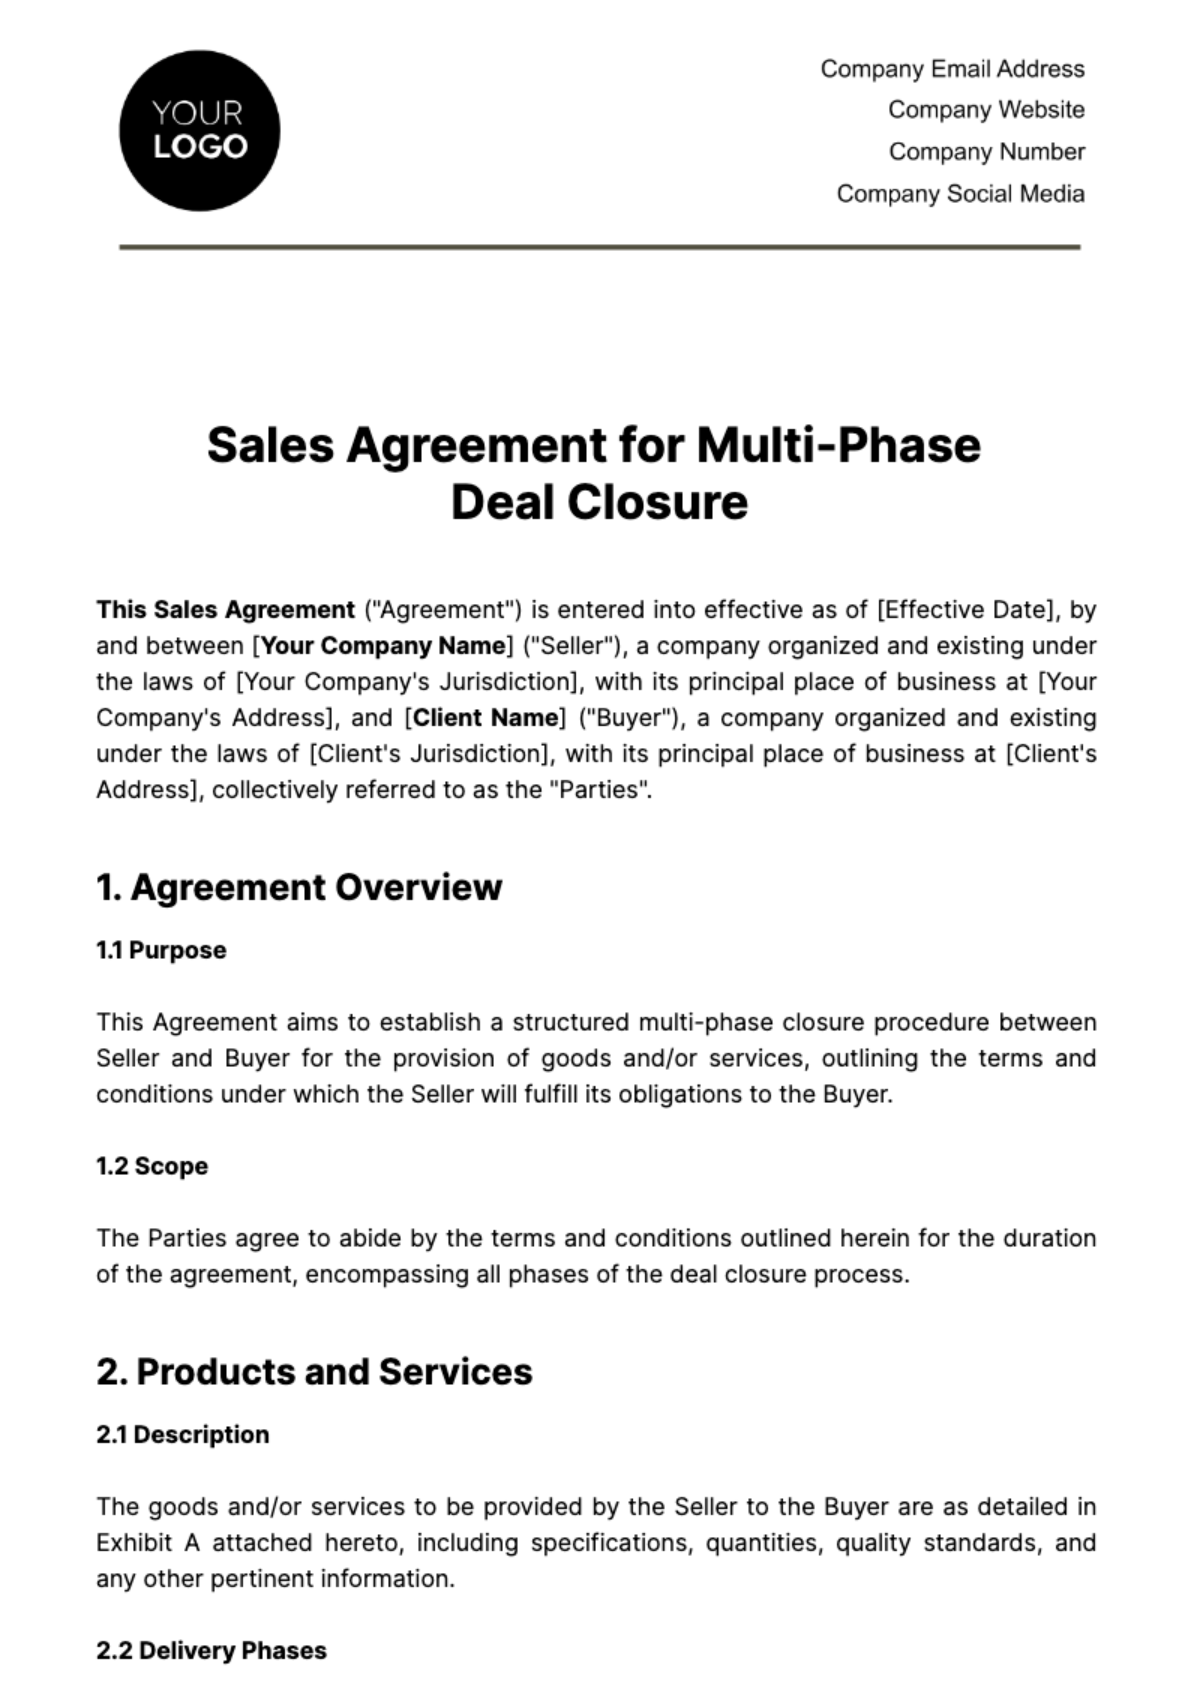 Free Sales Agreement for Multi-Phase Deal Closure Template